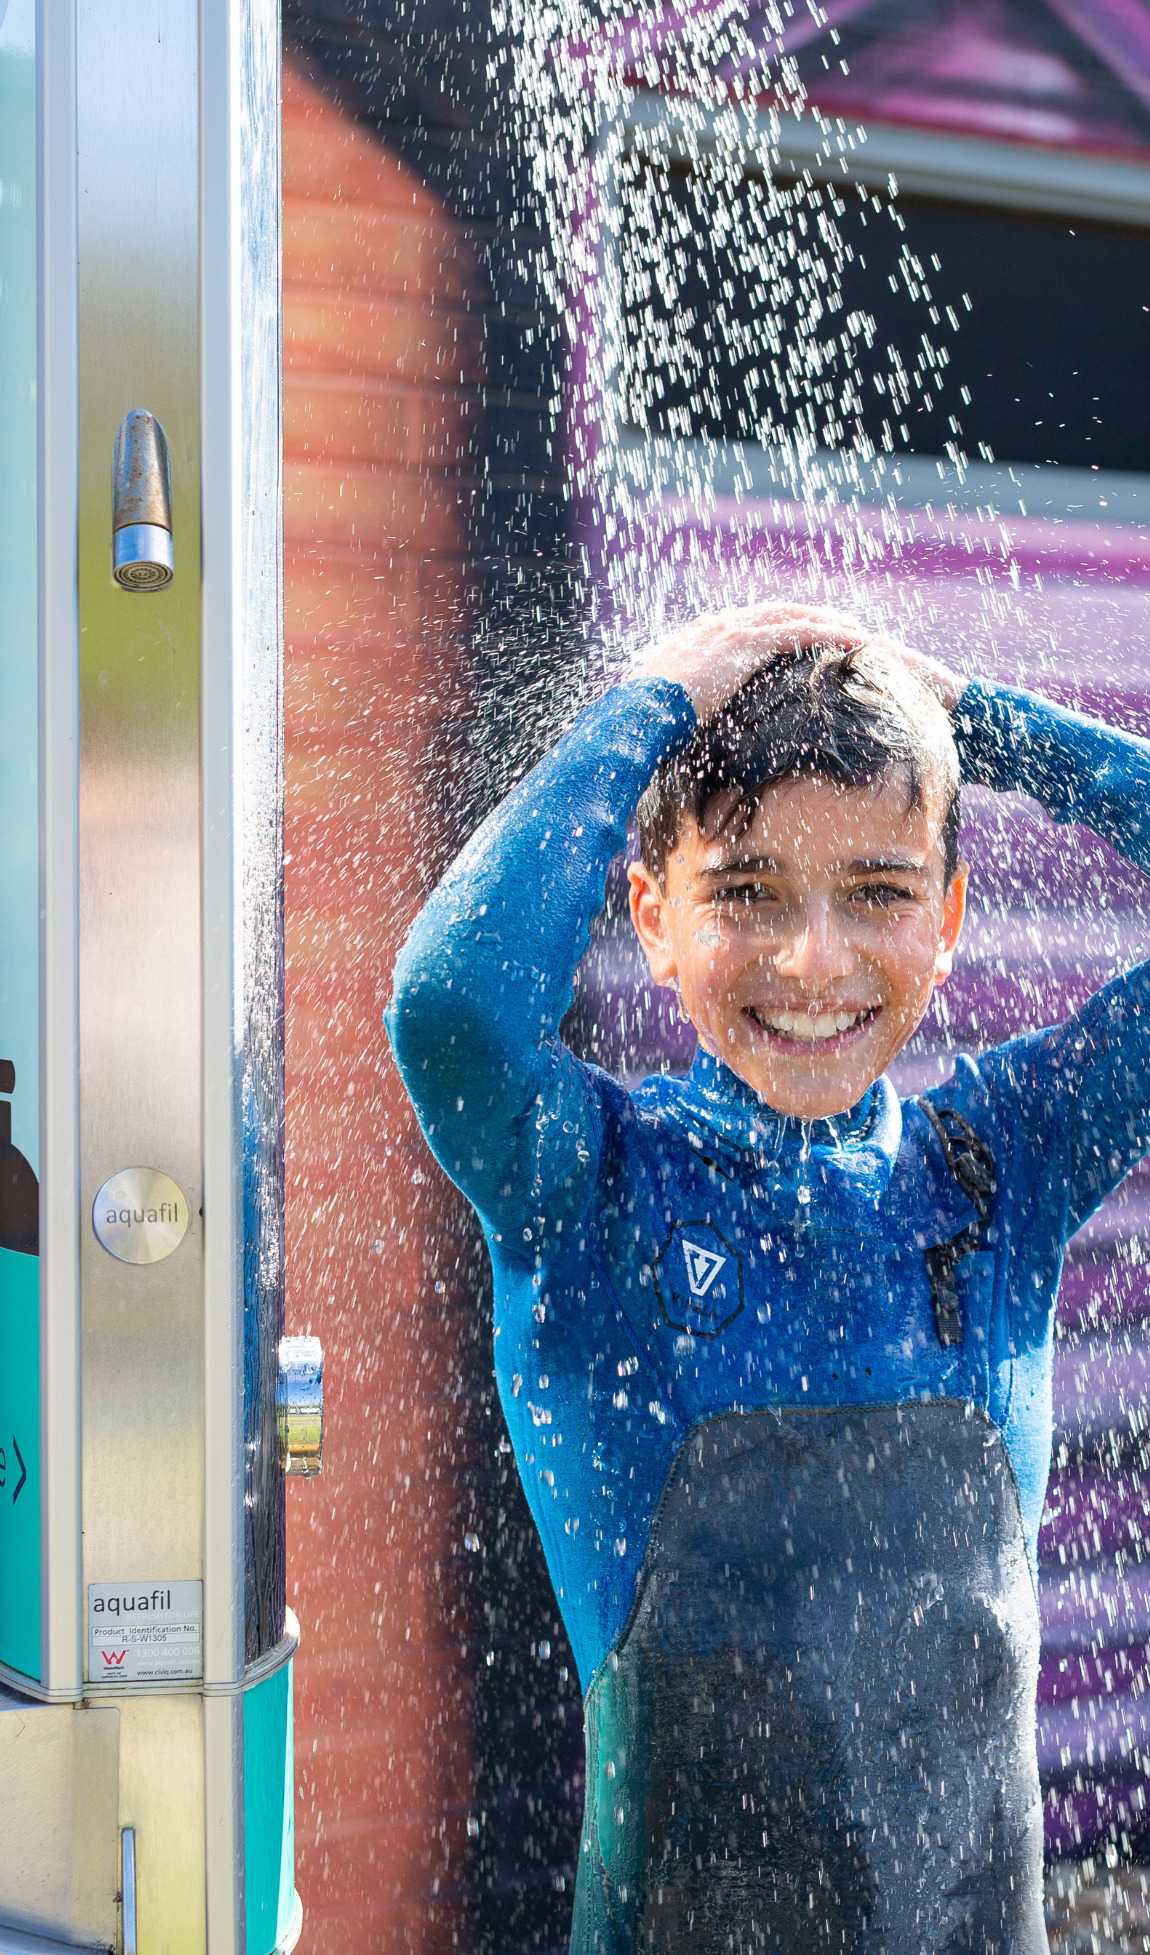 A guest savoring the refreshing convenience of the Civiq Aquafil Outdoor Shower at Culburra Beach Holiday Haven, which includes a drinking fountain and bottle refilling station, providing a handy way for beachgoers to cleanse and stay refreshed.